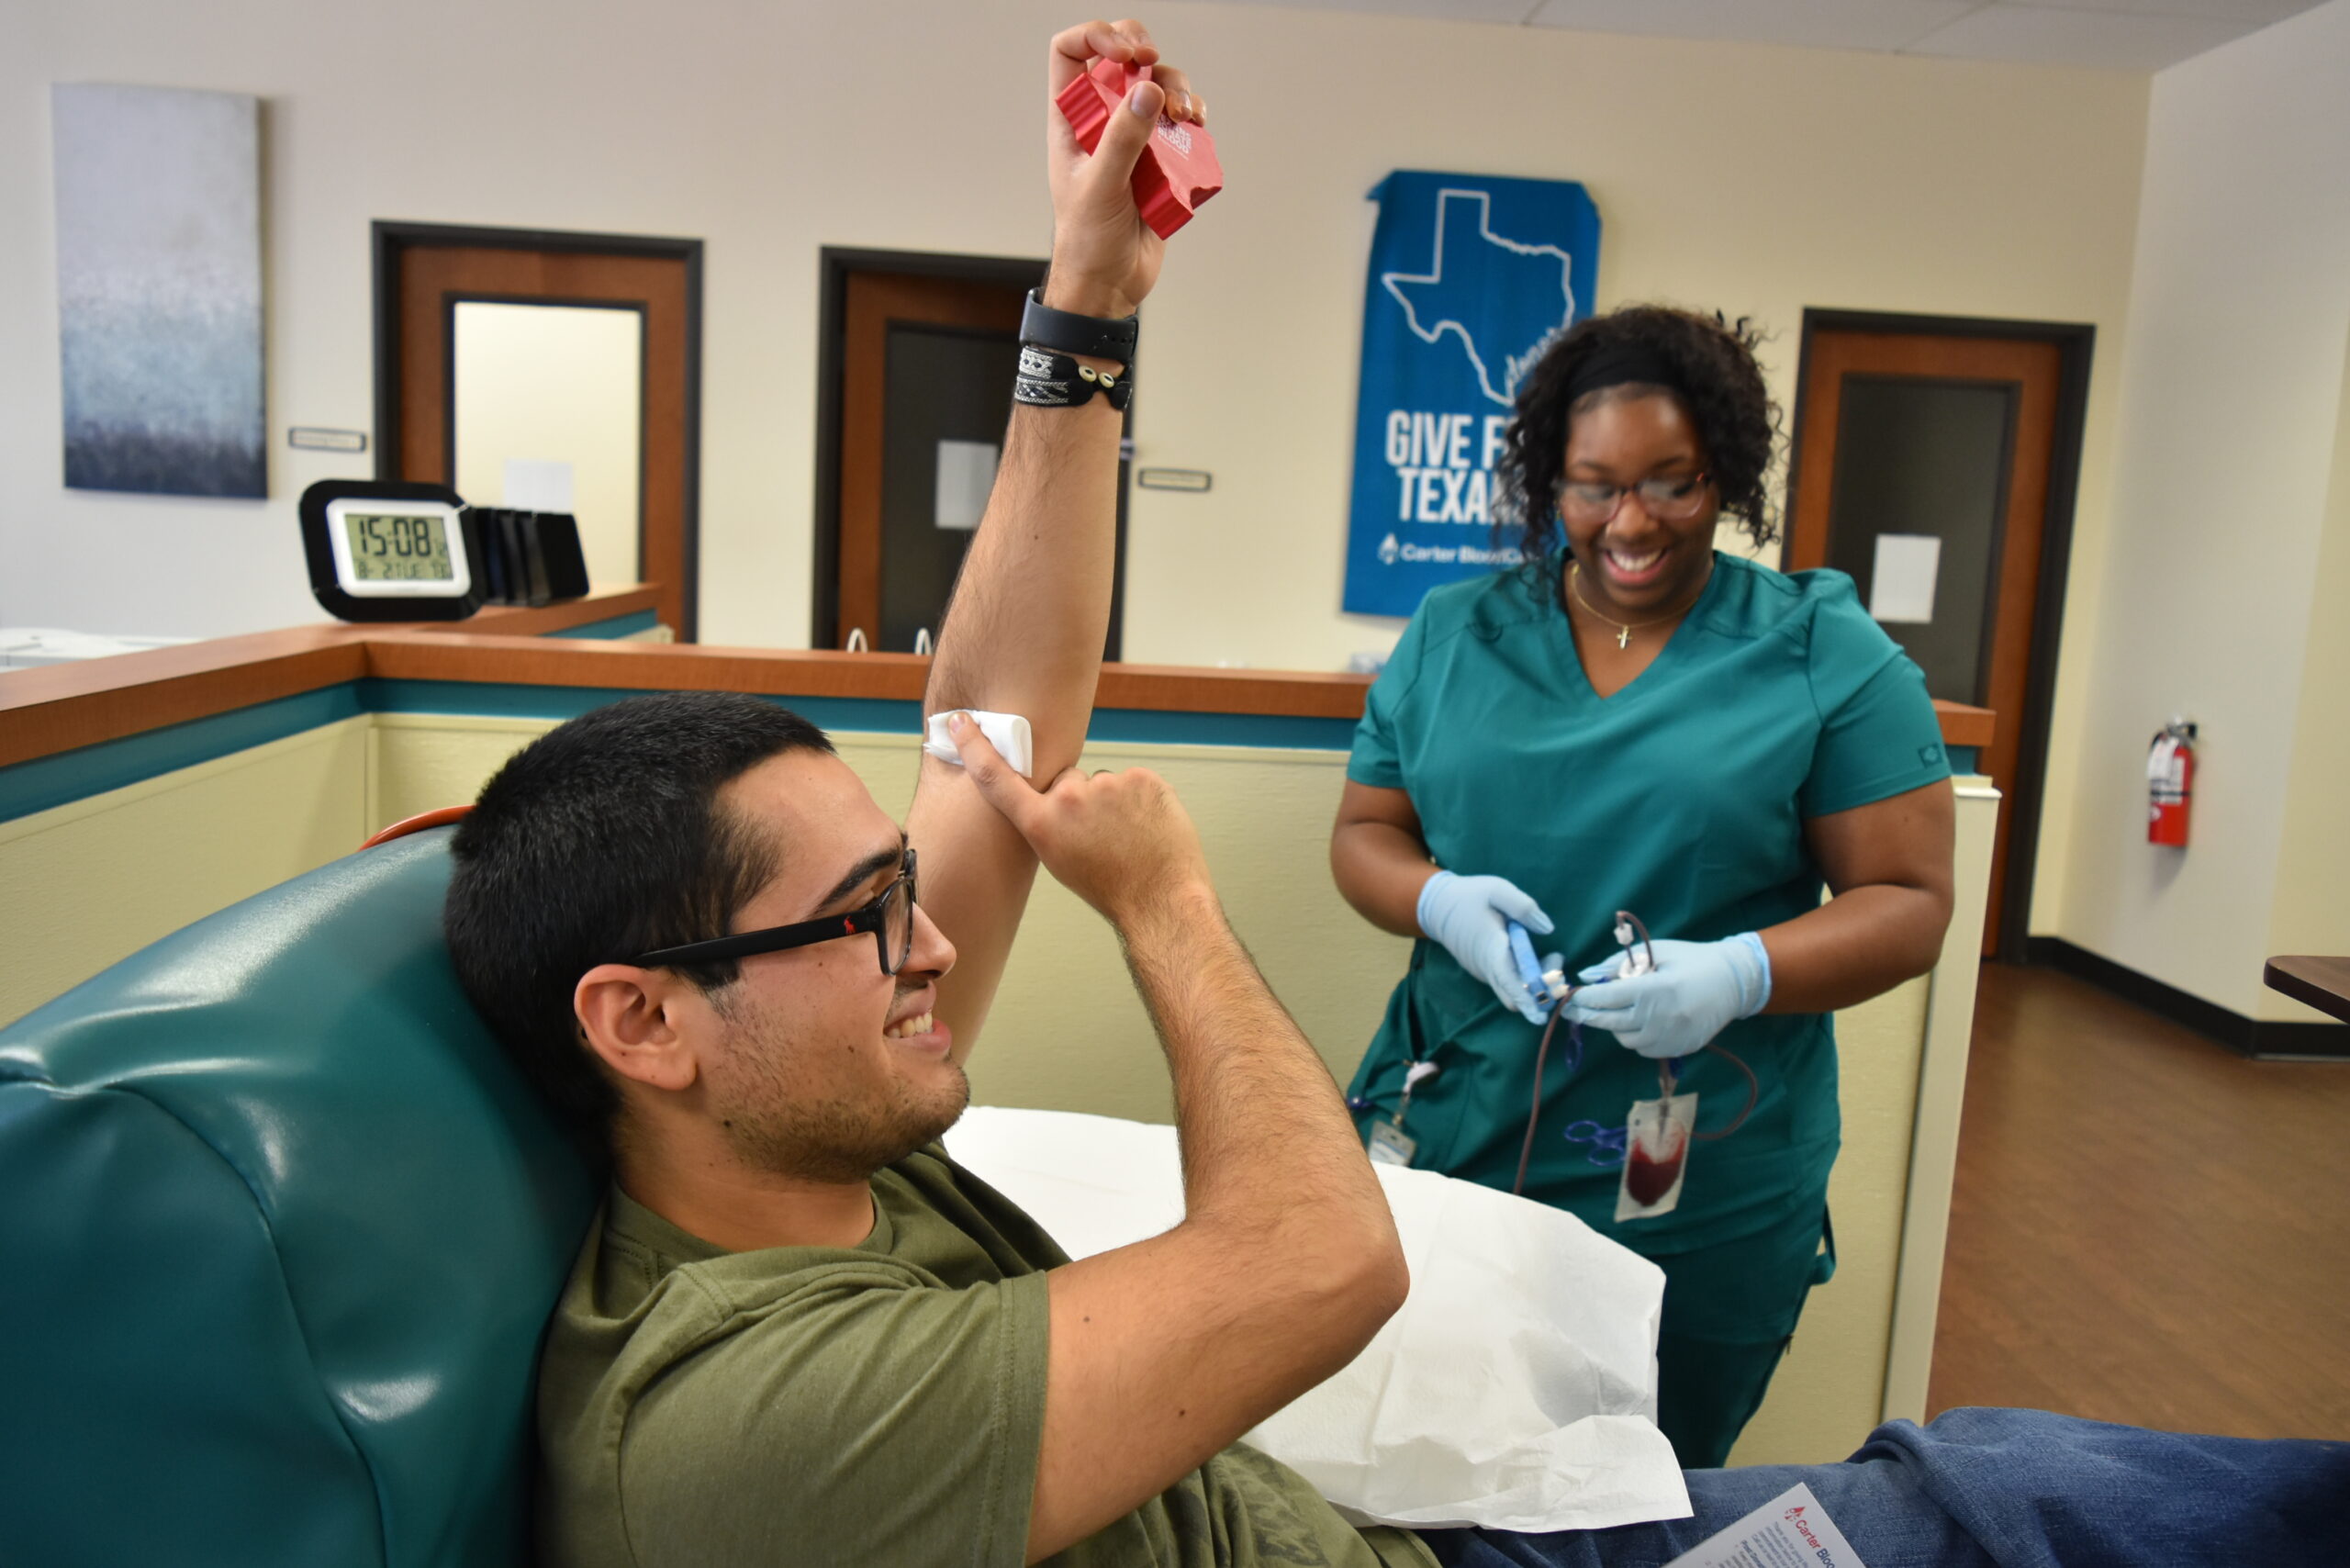 In emergencies, blood donors help in a pinch